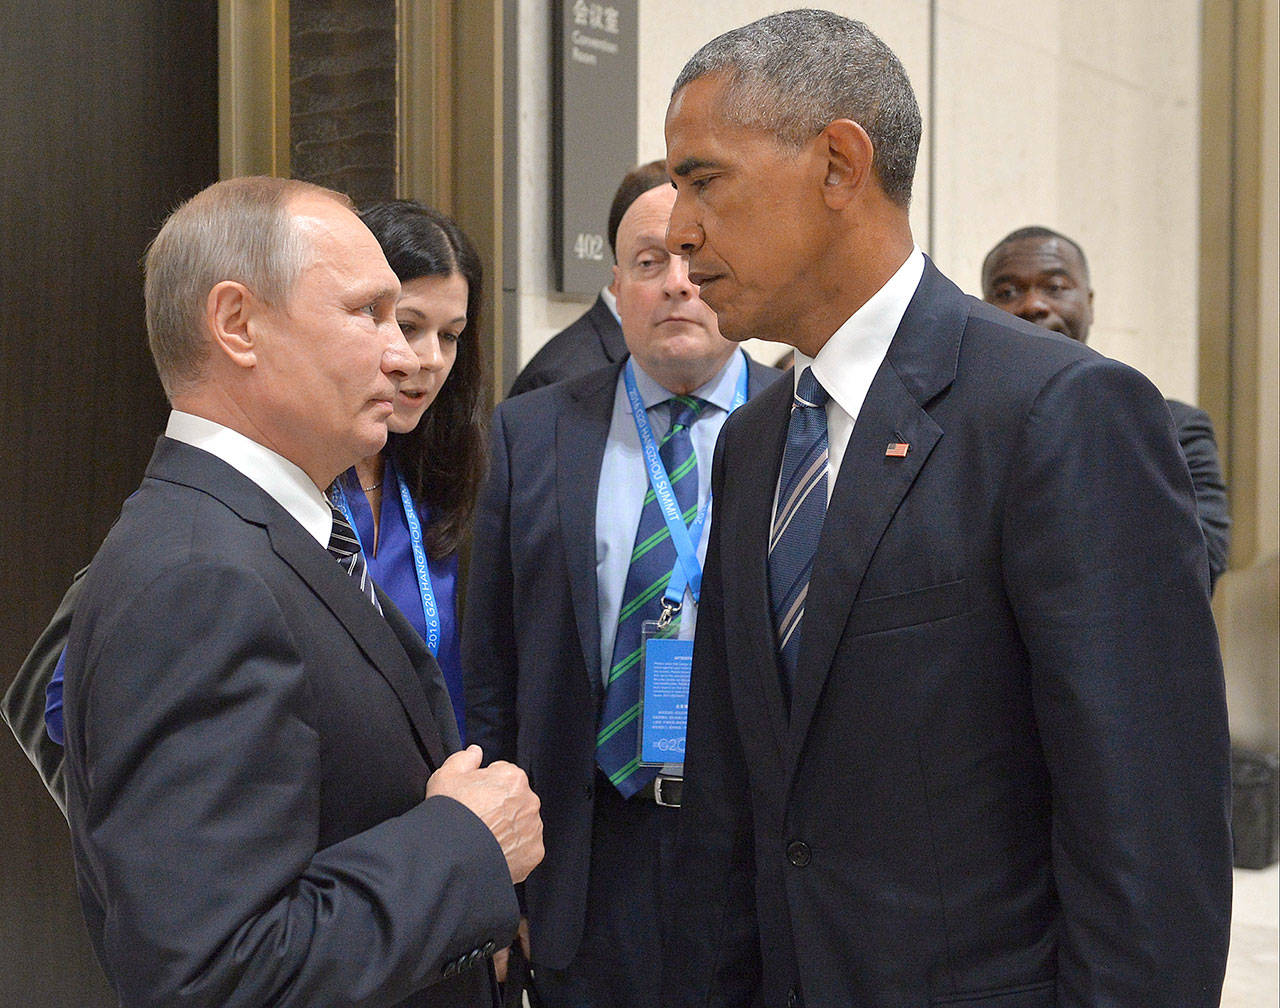 On Sept. 5, 2016, at a meeting of world leaders in Hangzhou, China, U.S. President Barack Obama (right) met with Russian President Vladimir Putin. At one point, accompanied only by interpreters, Obama told Putin that “we knew what he was doing and [he] better stop or else,” according to a senior aide who subsequently spoke with Obama. (Alexei Druzhinin/Sputnik, Kremlin Pool Photo via AP, File)